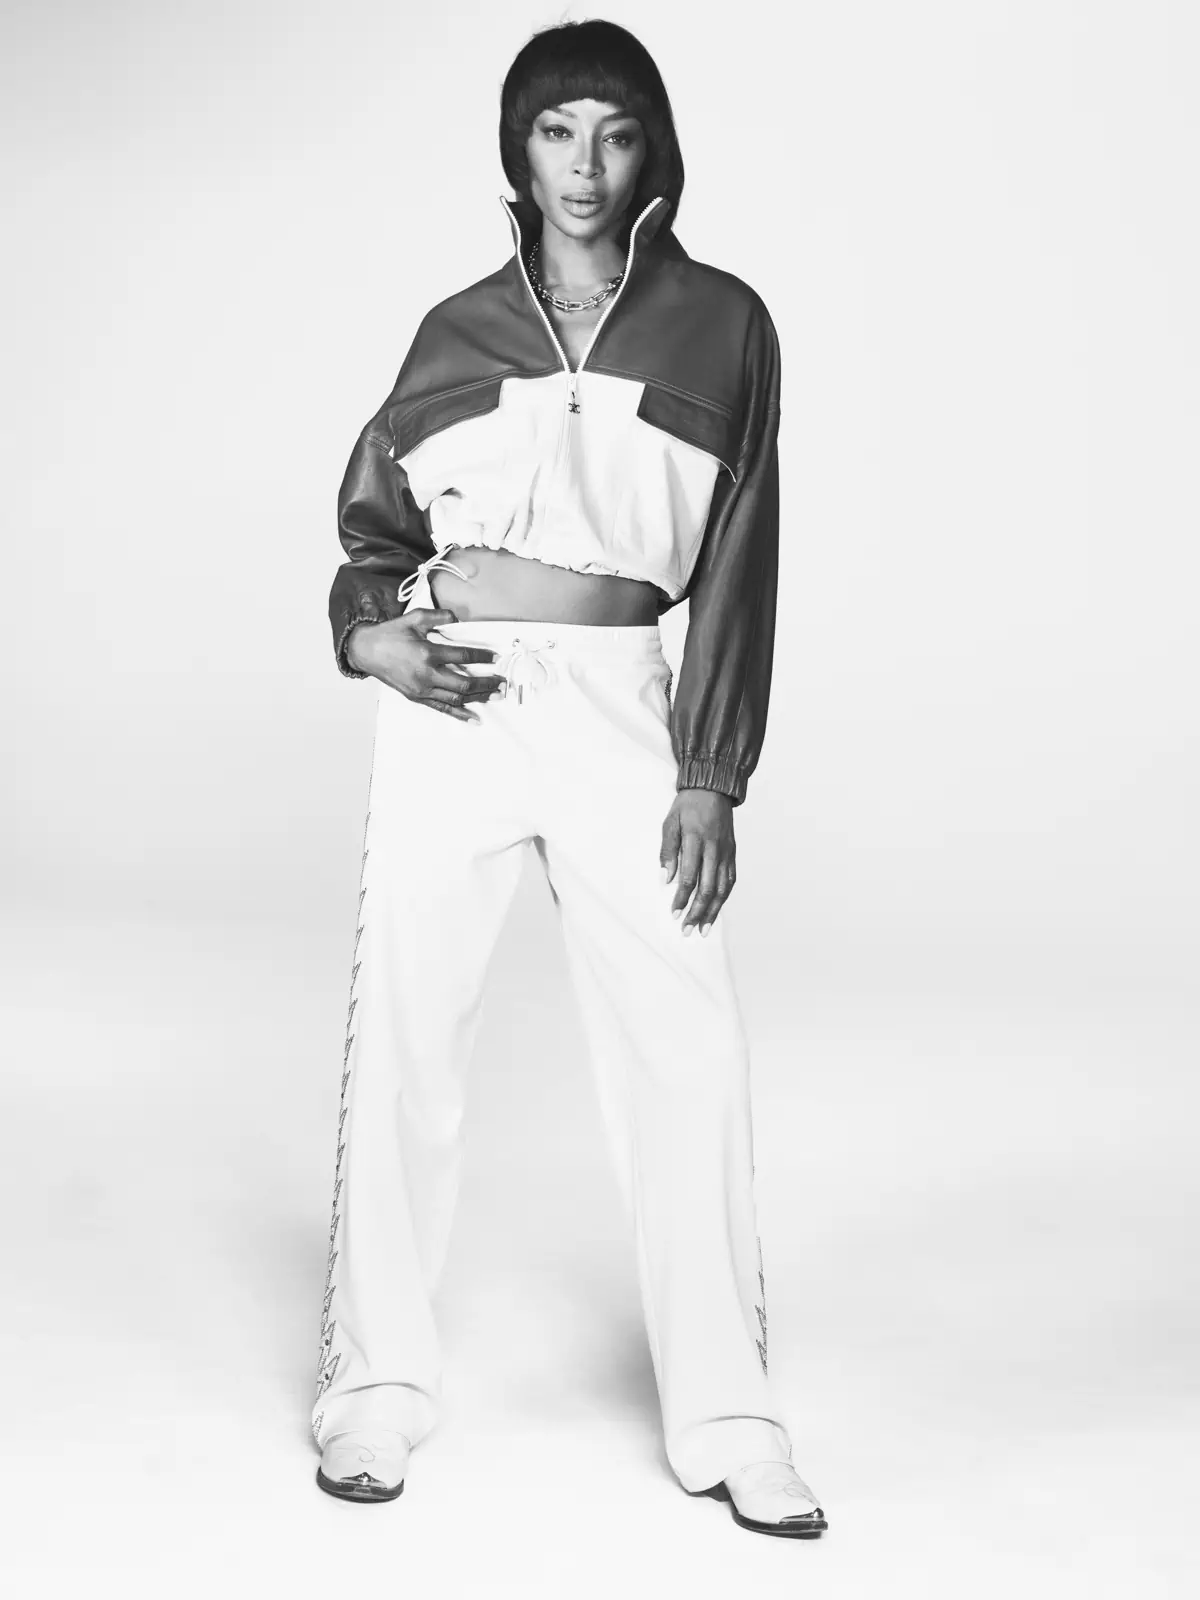 Naomi Campbell covers Document Journal Spring Summer 2023 by Thue Nørgaard